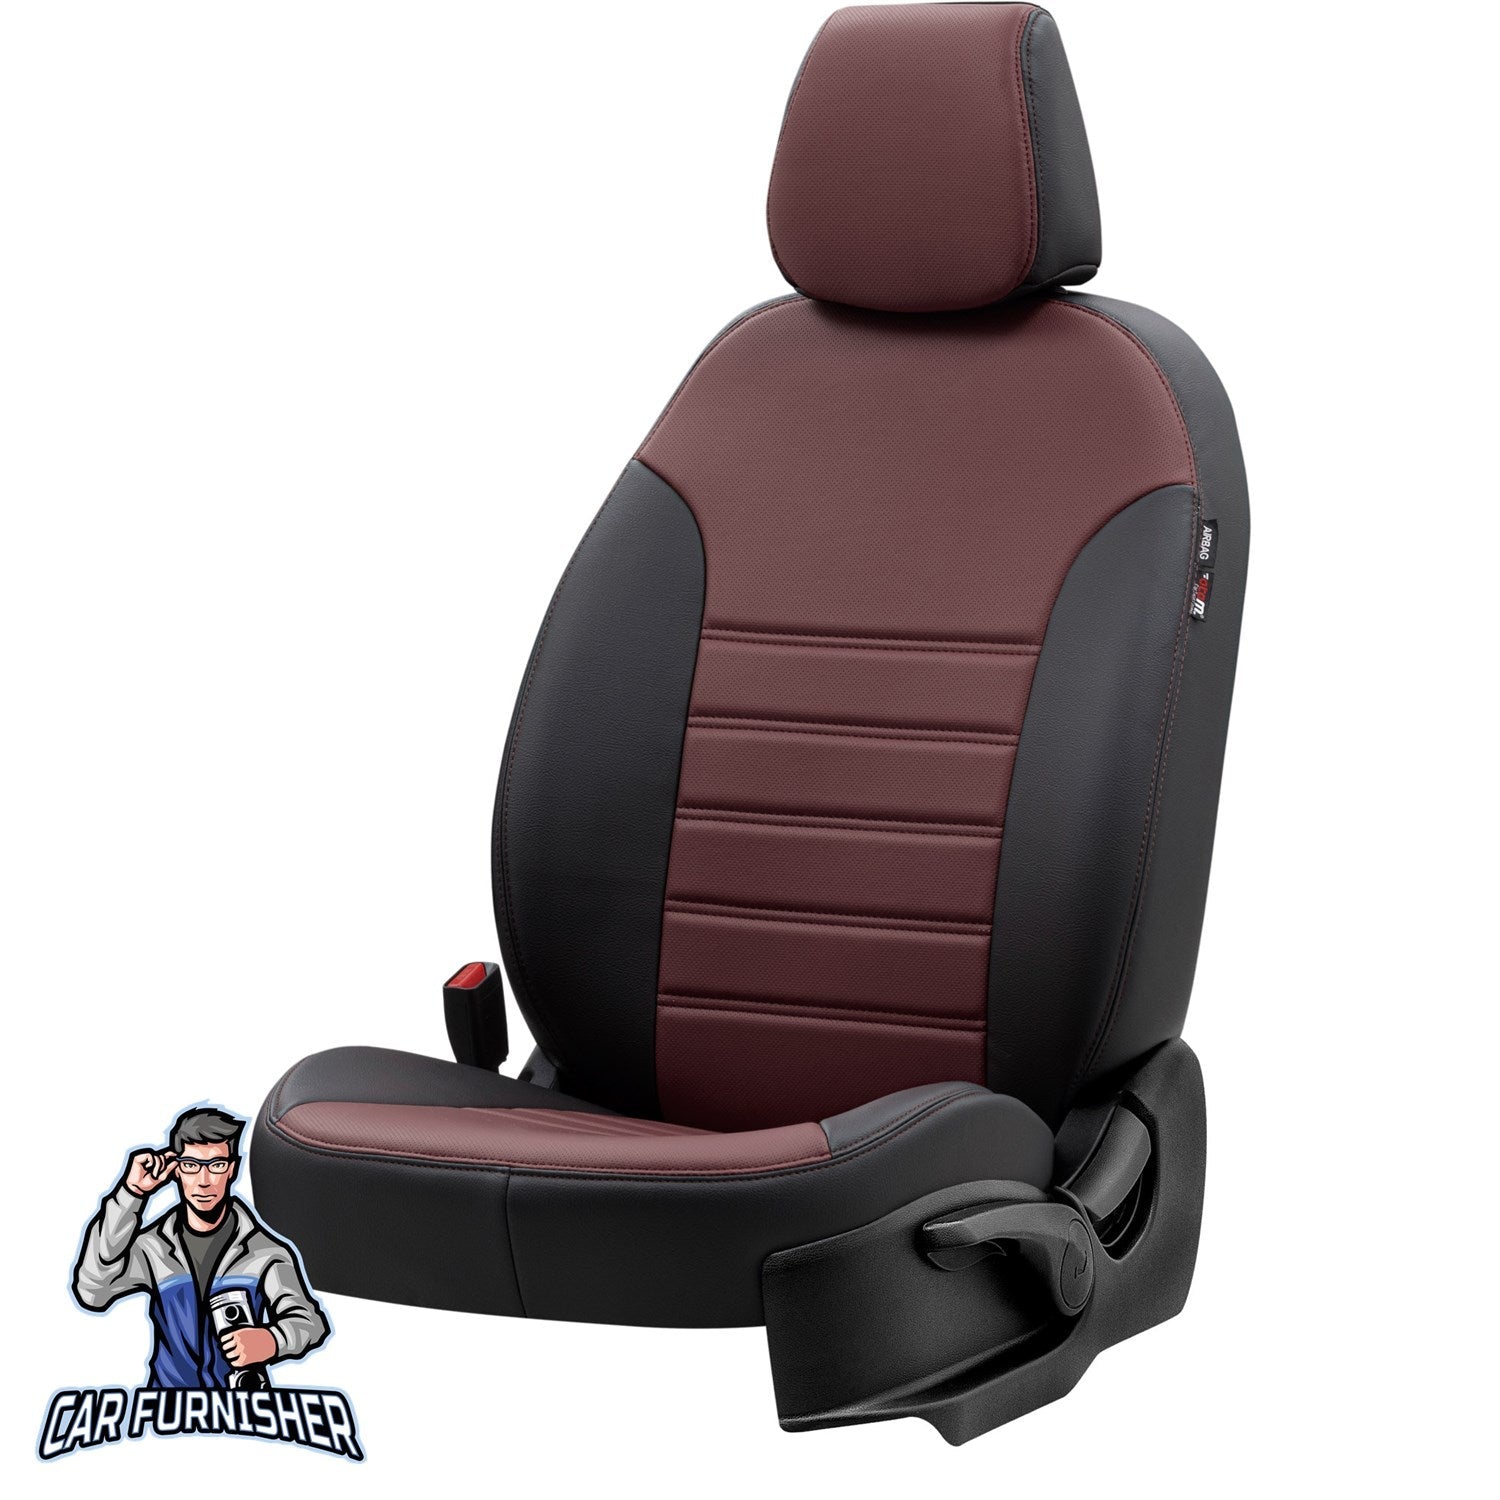 Mercedes A Class Seat Covers Istanbul Leather Design Burgundy Leather